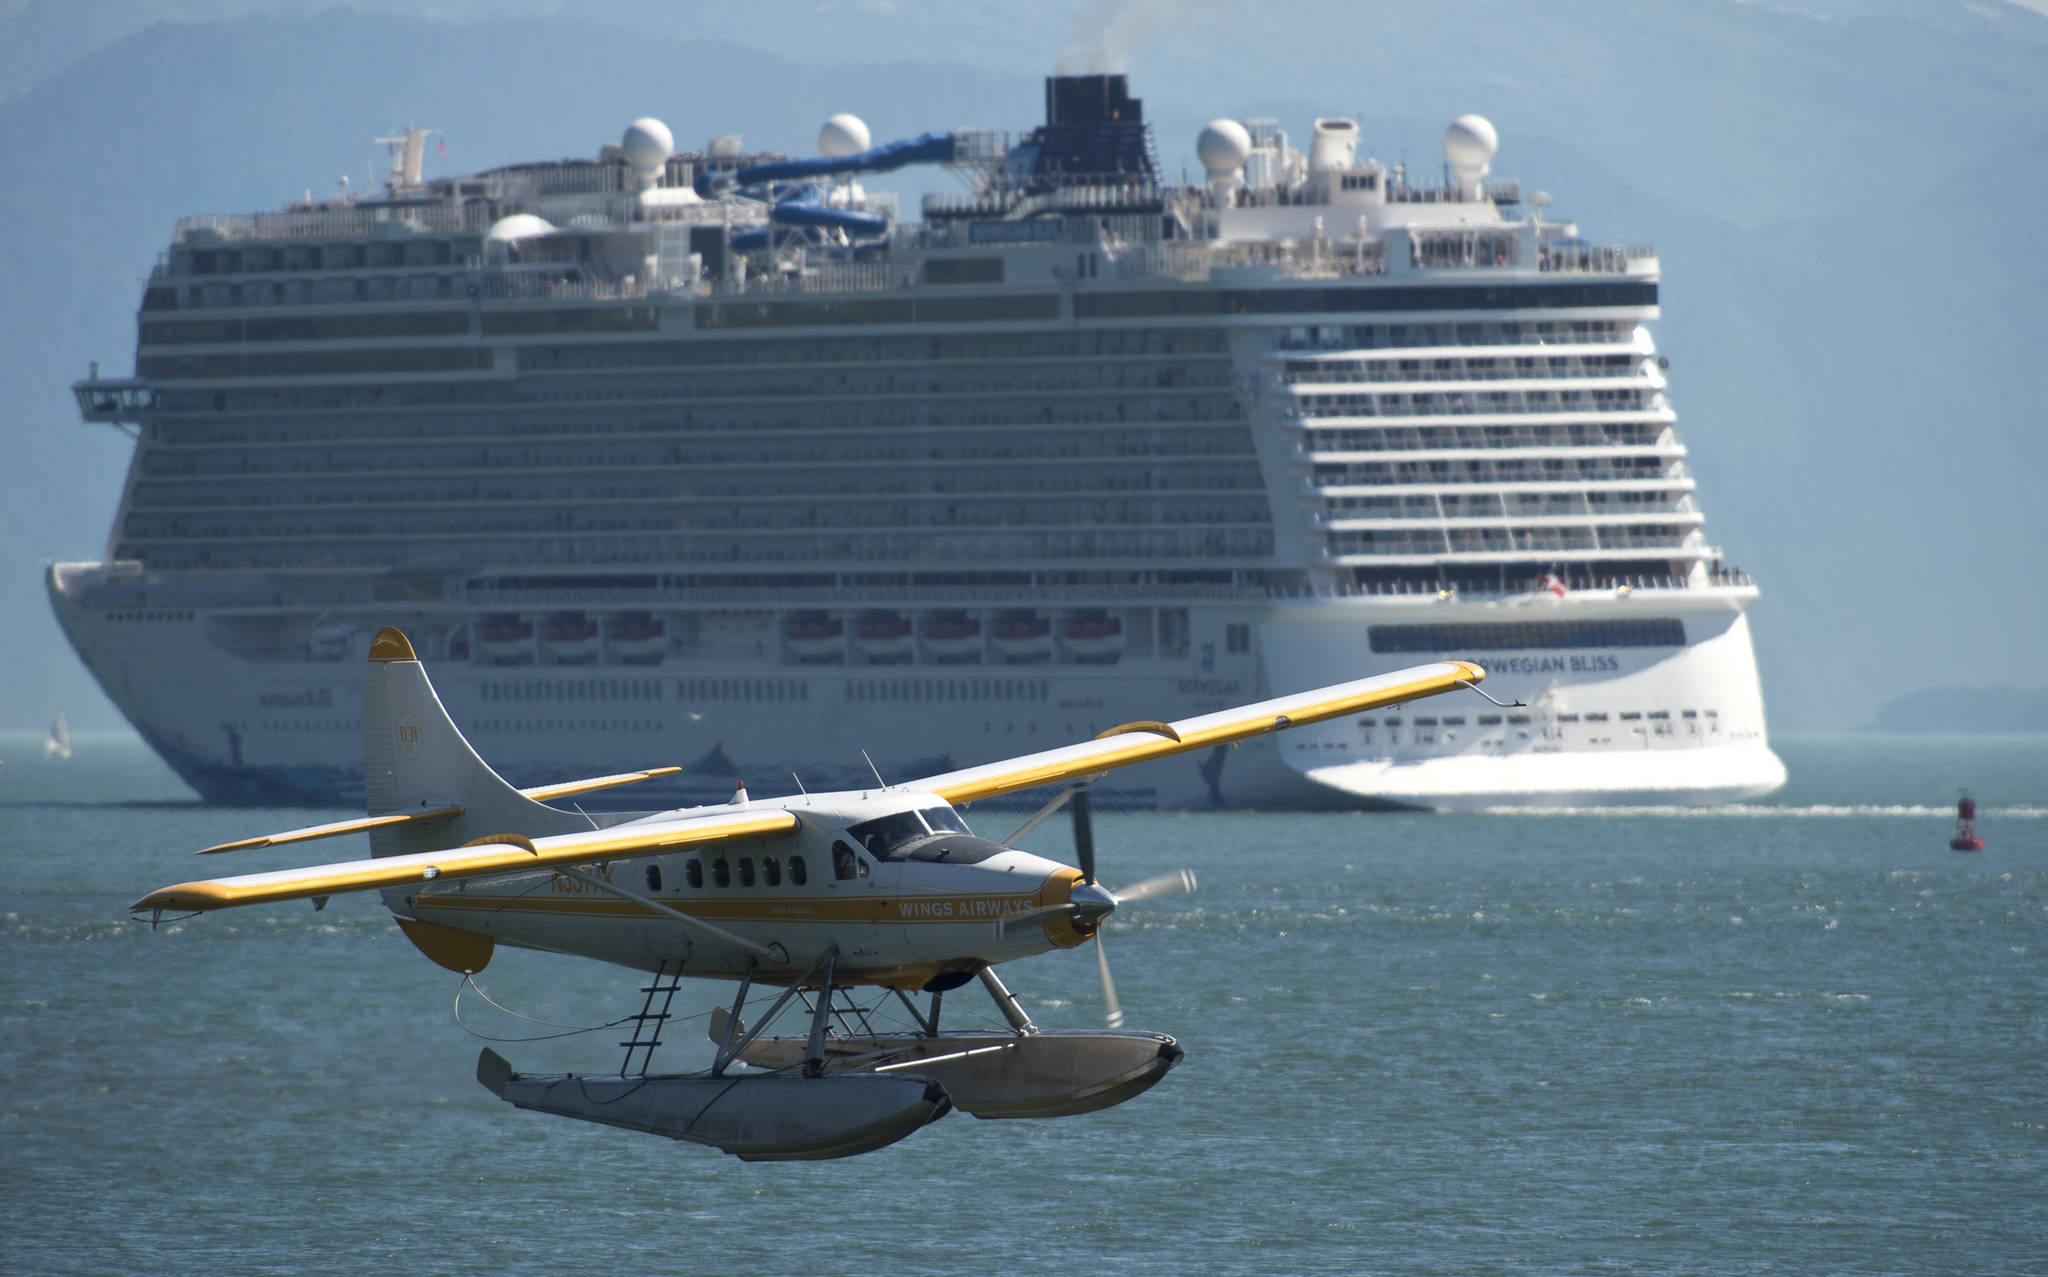 A Wings Airways floatplane takes off from Juneau’s downtown harbor as the Norwegian Bliss leaves its port of call on Tuesday, July 31, 2018. (Michael Penn | Juneau Empire File)